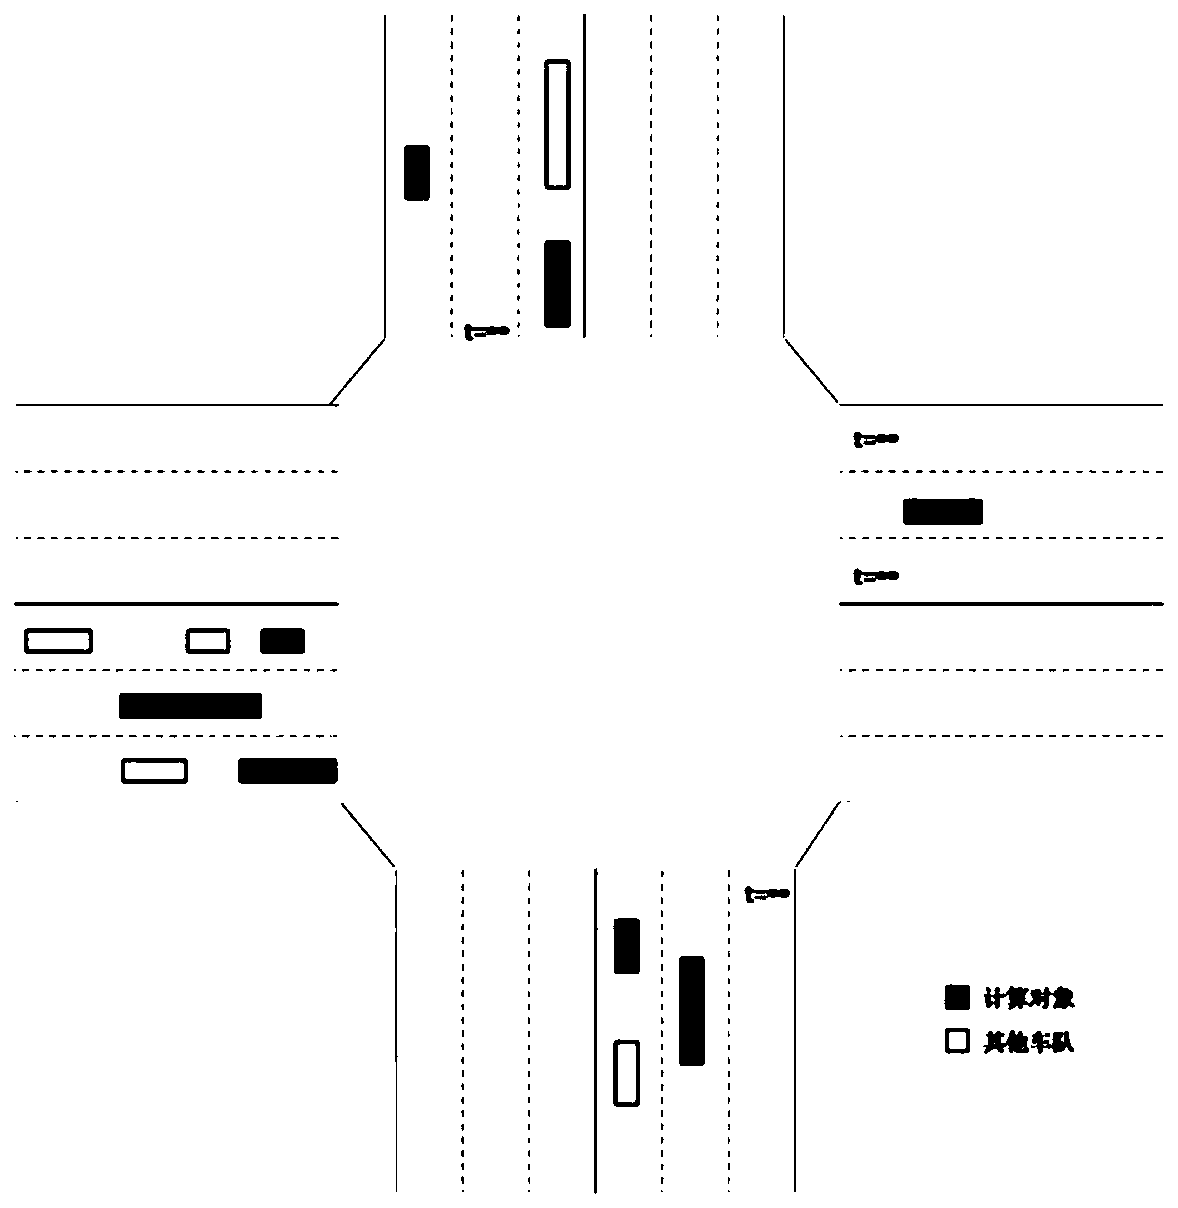 A self-organizing control method for intersections for networked autonomous vehicles